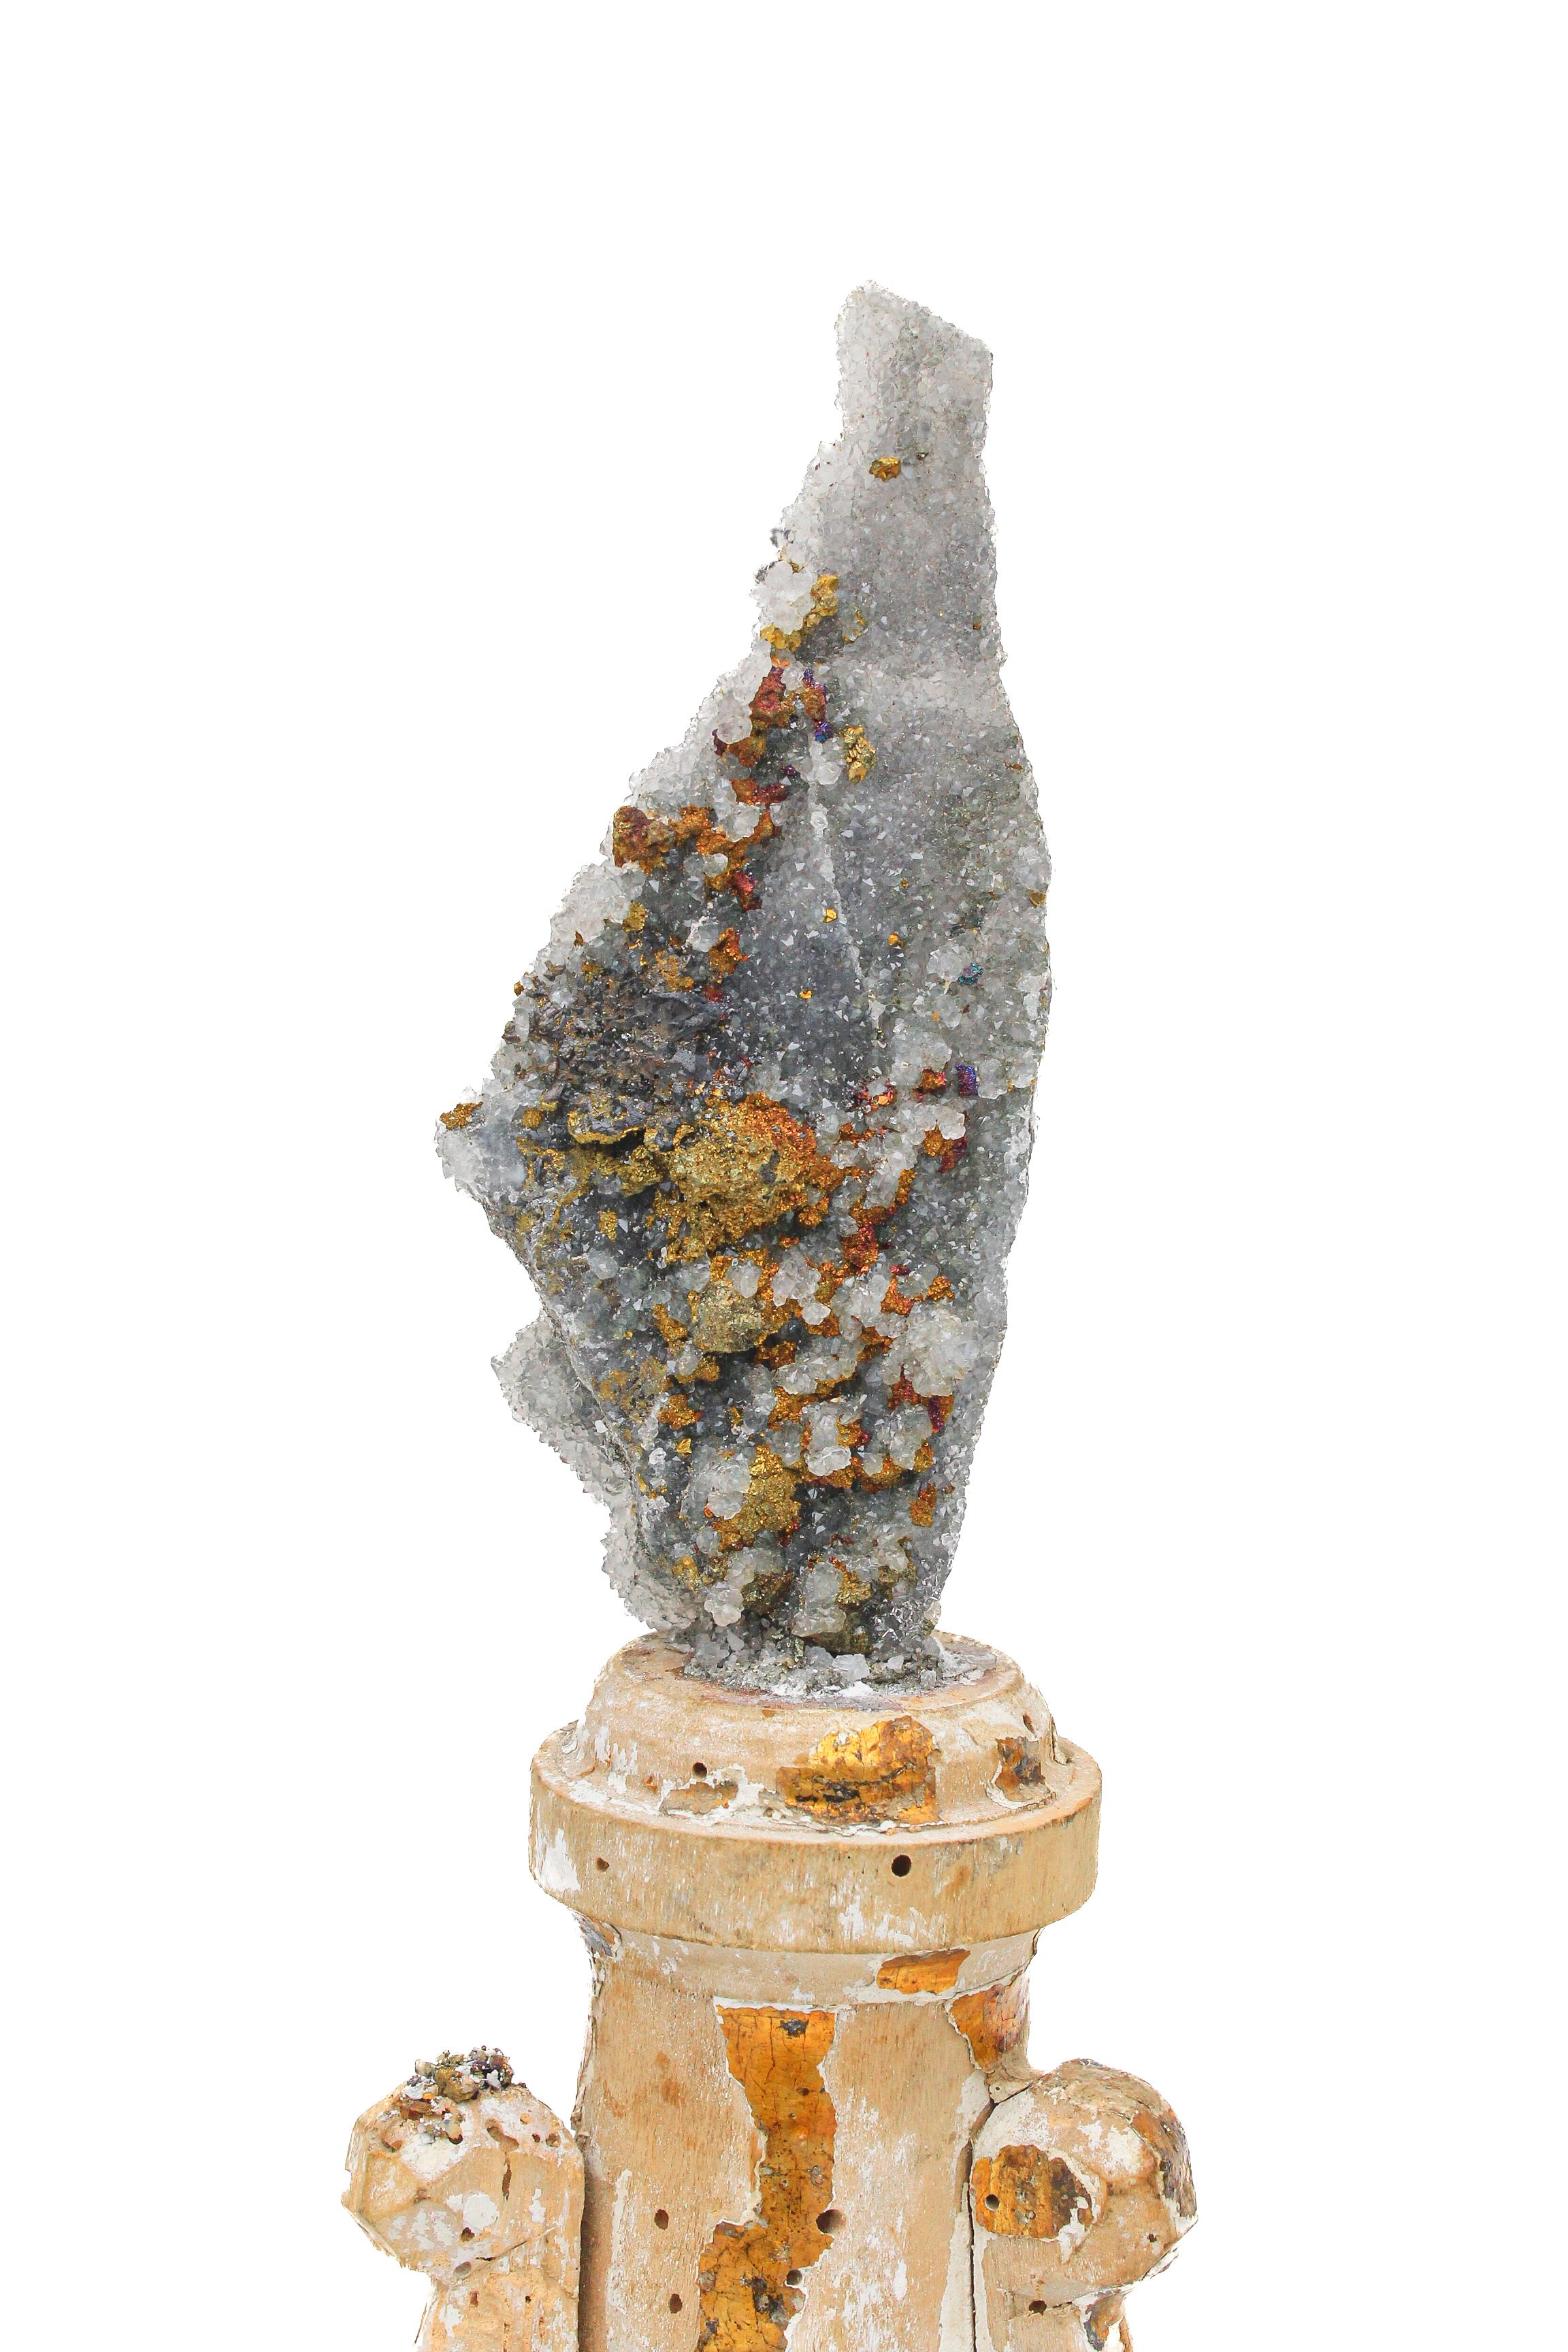 Baroque 17th Century Italian Fragment with Chalcopyrite in a Druzy Crystal Matrix For Sale